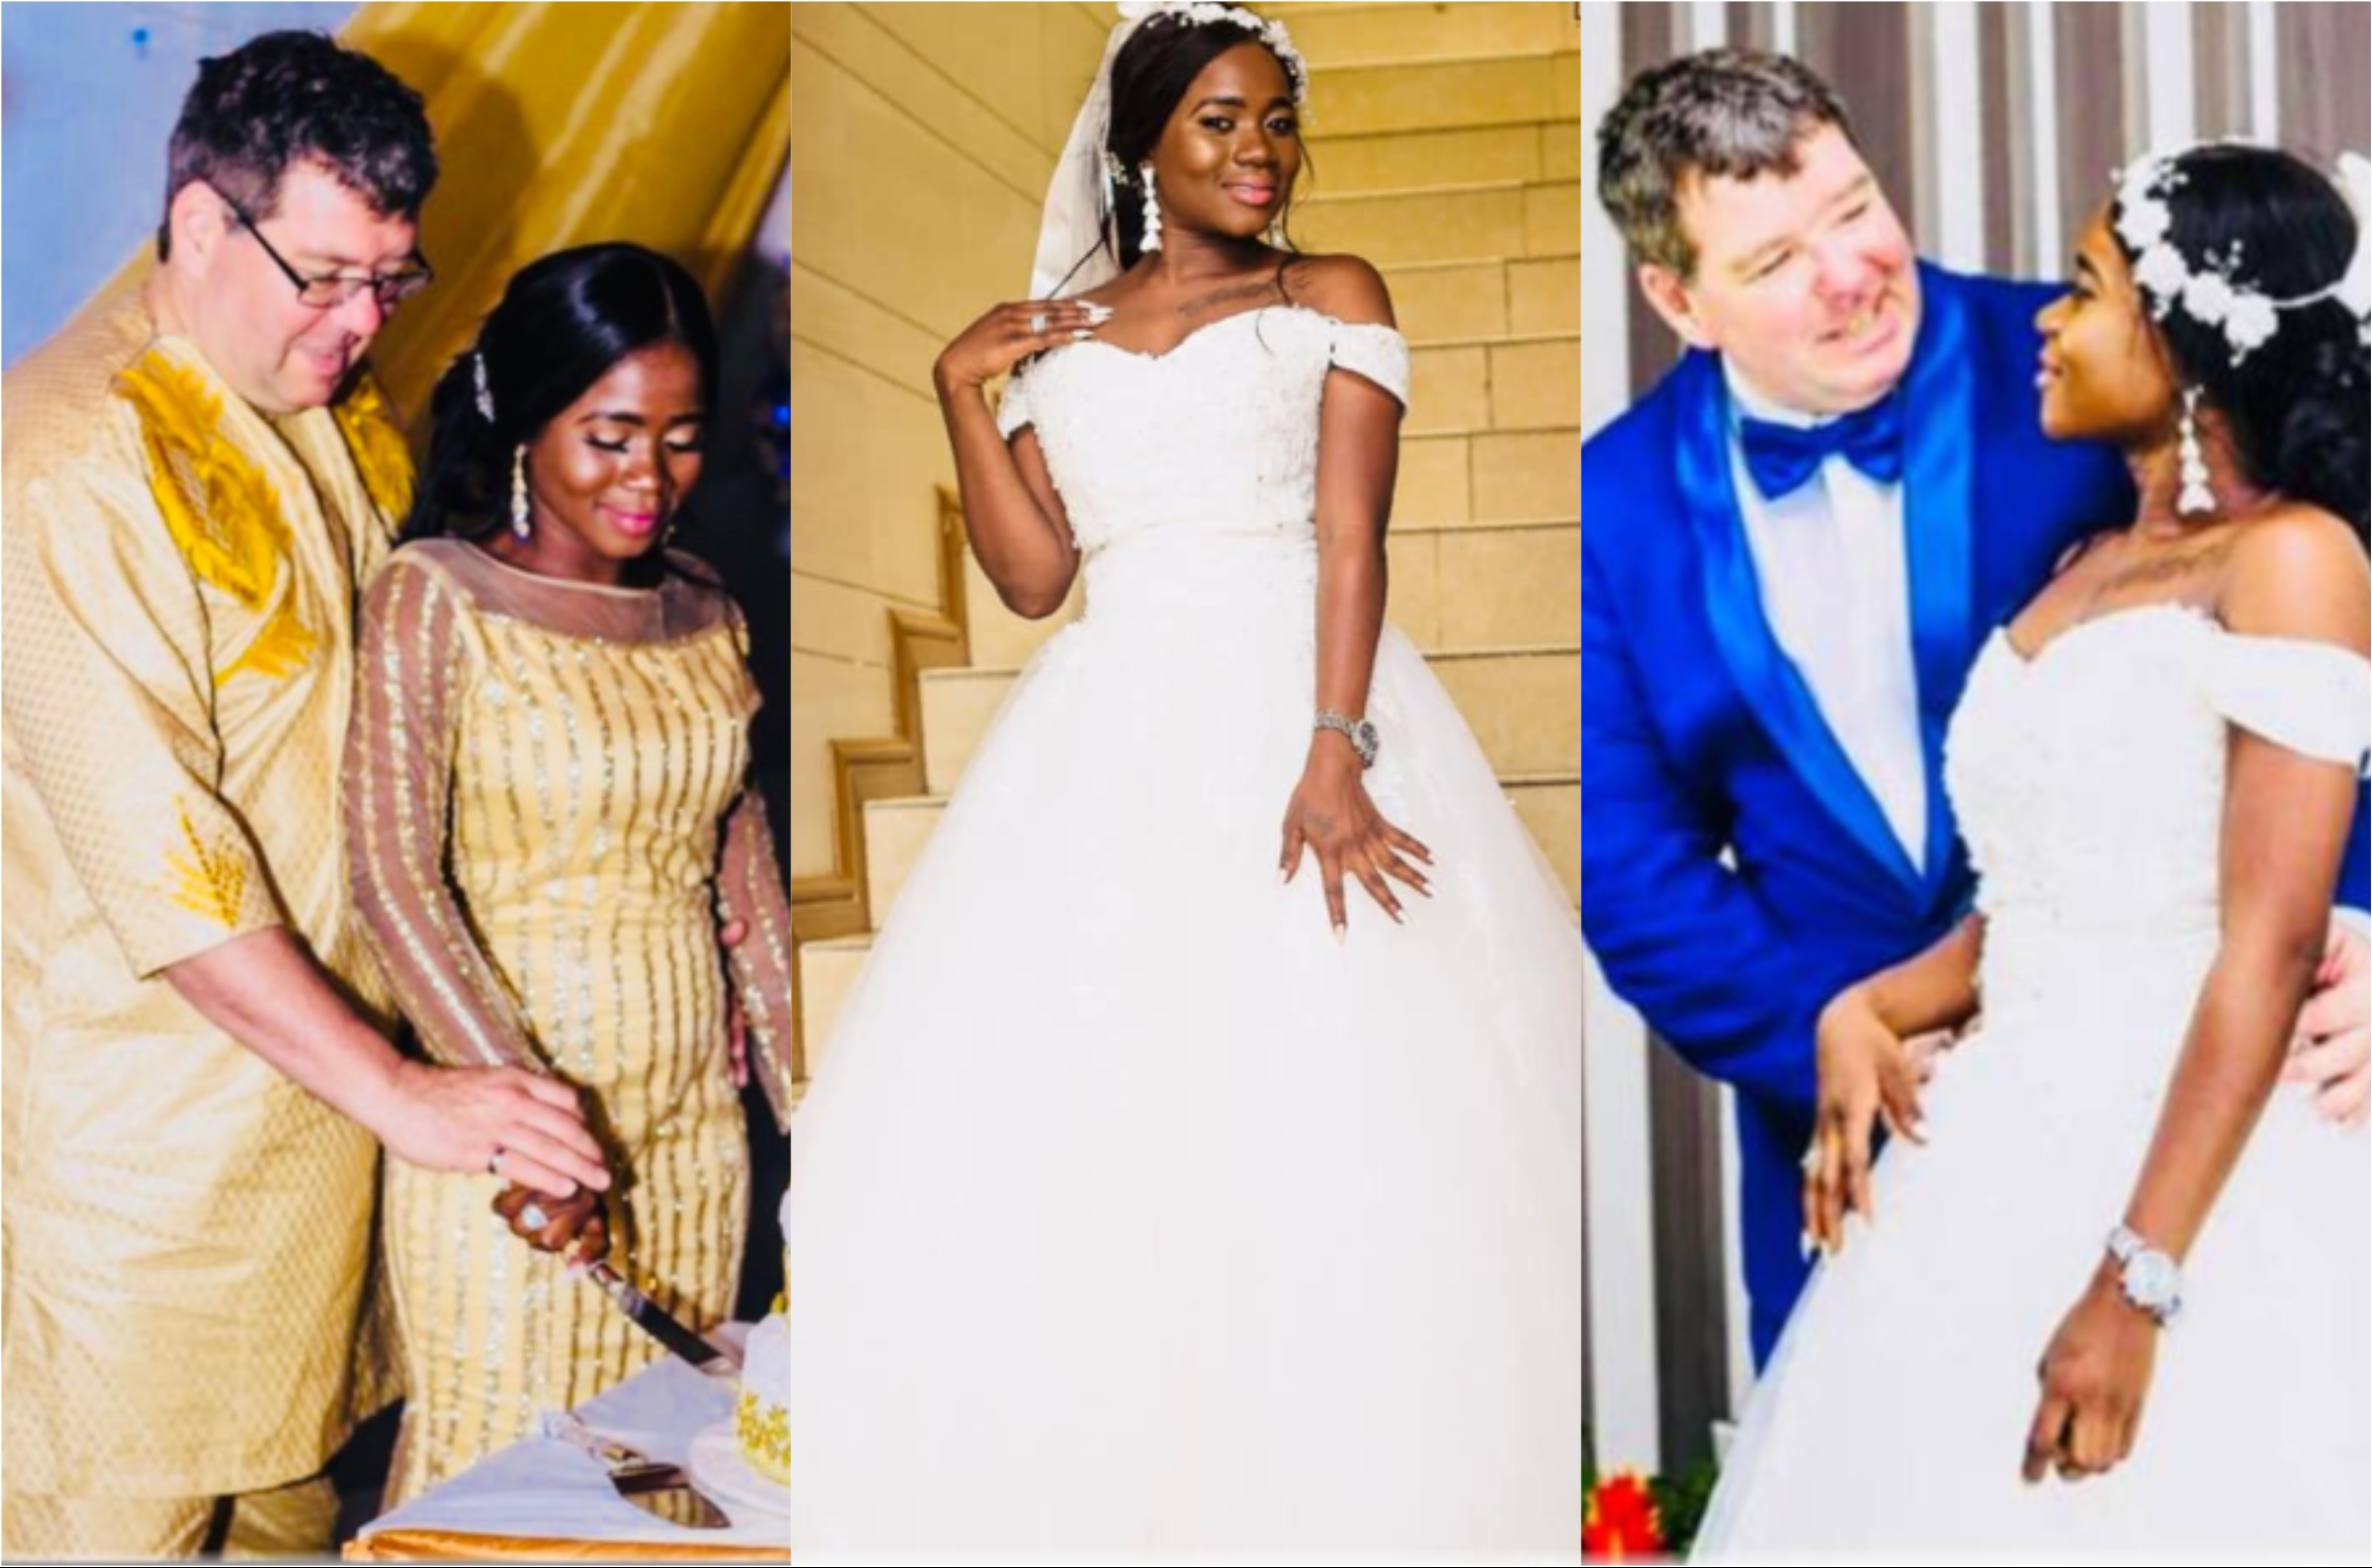 PHOTOS: Stunning wedding photos of curvy African lady with her 'oyibo' hubby pop up